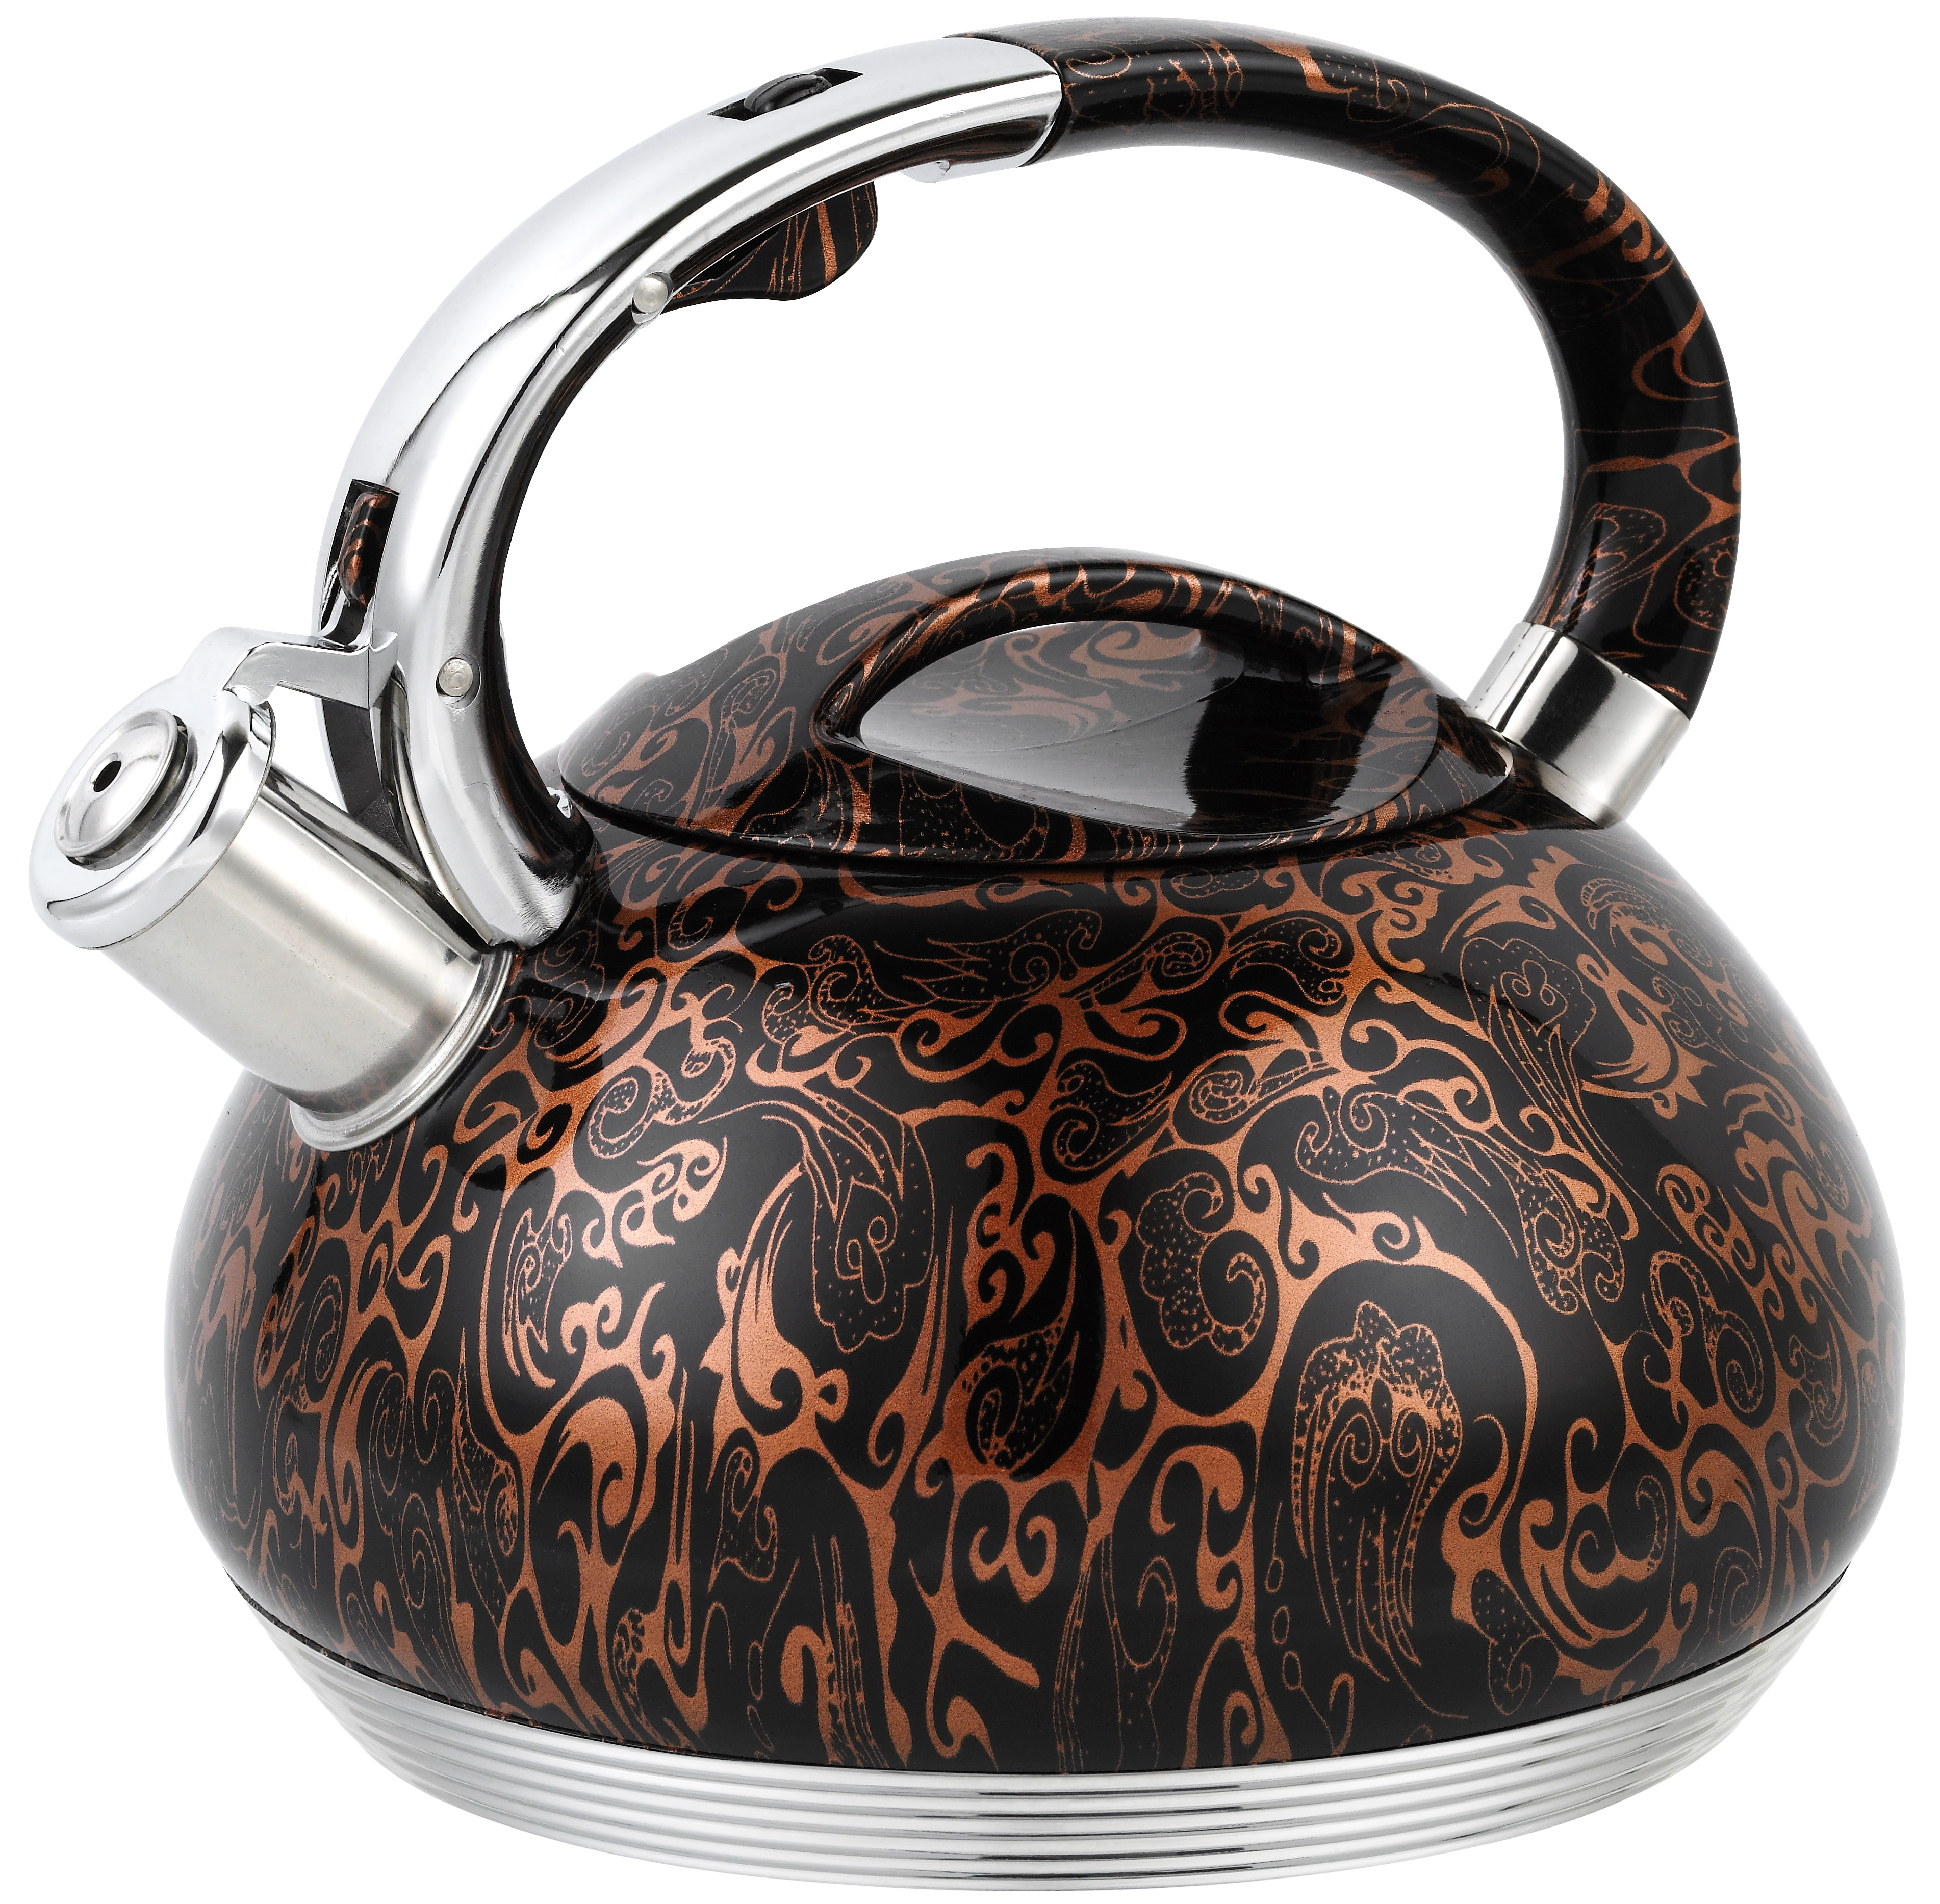 New Design Stainless Steel Whistling Water Kettle With Handle 3L